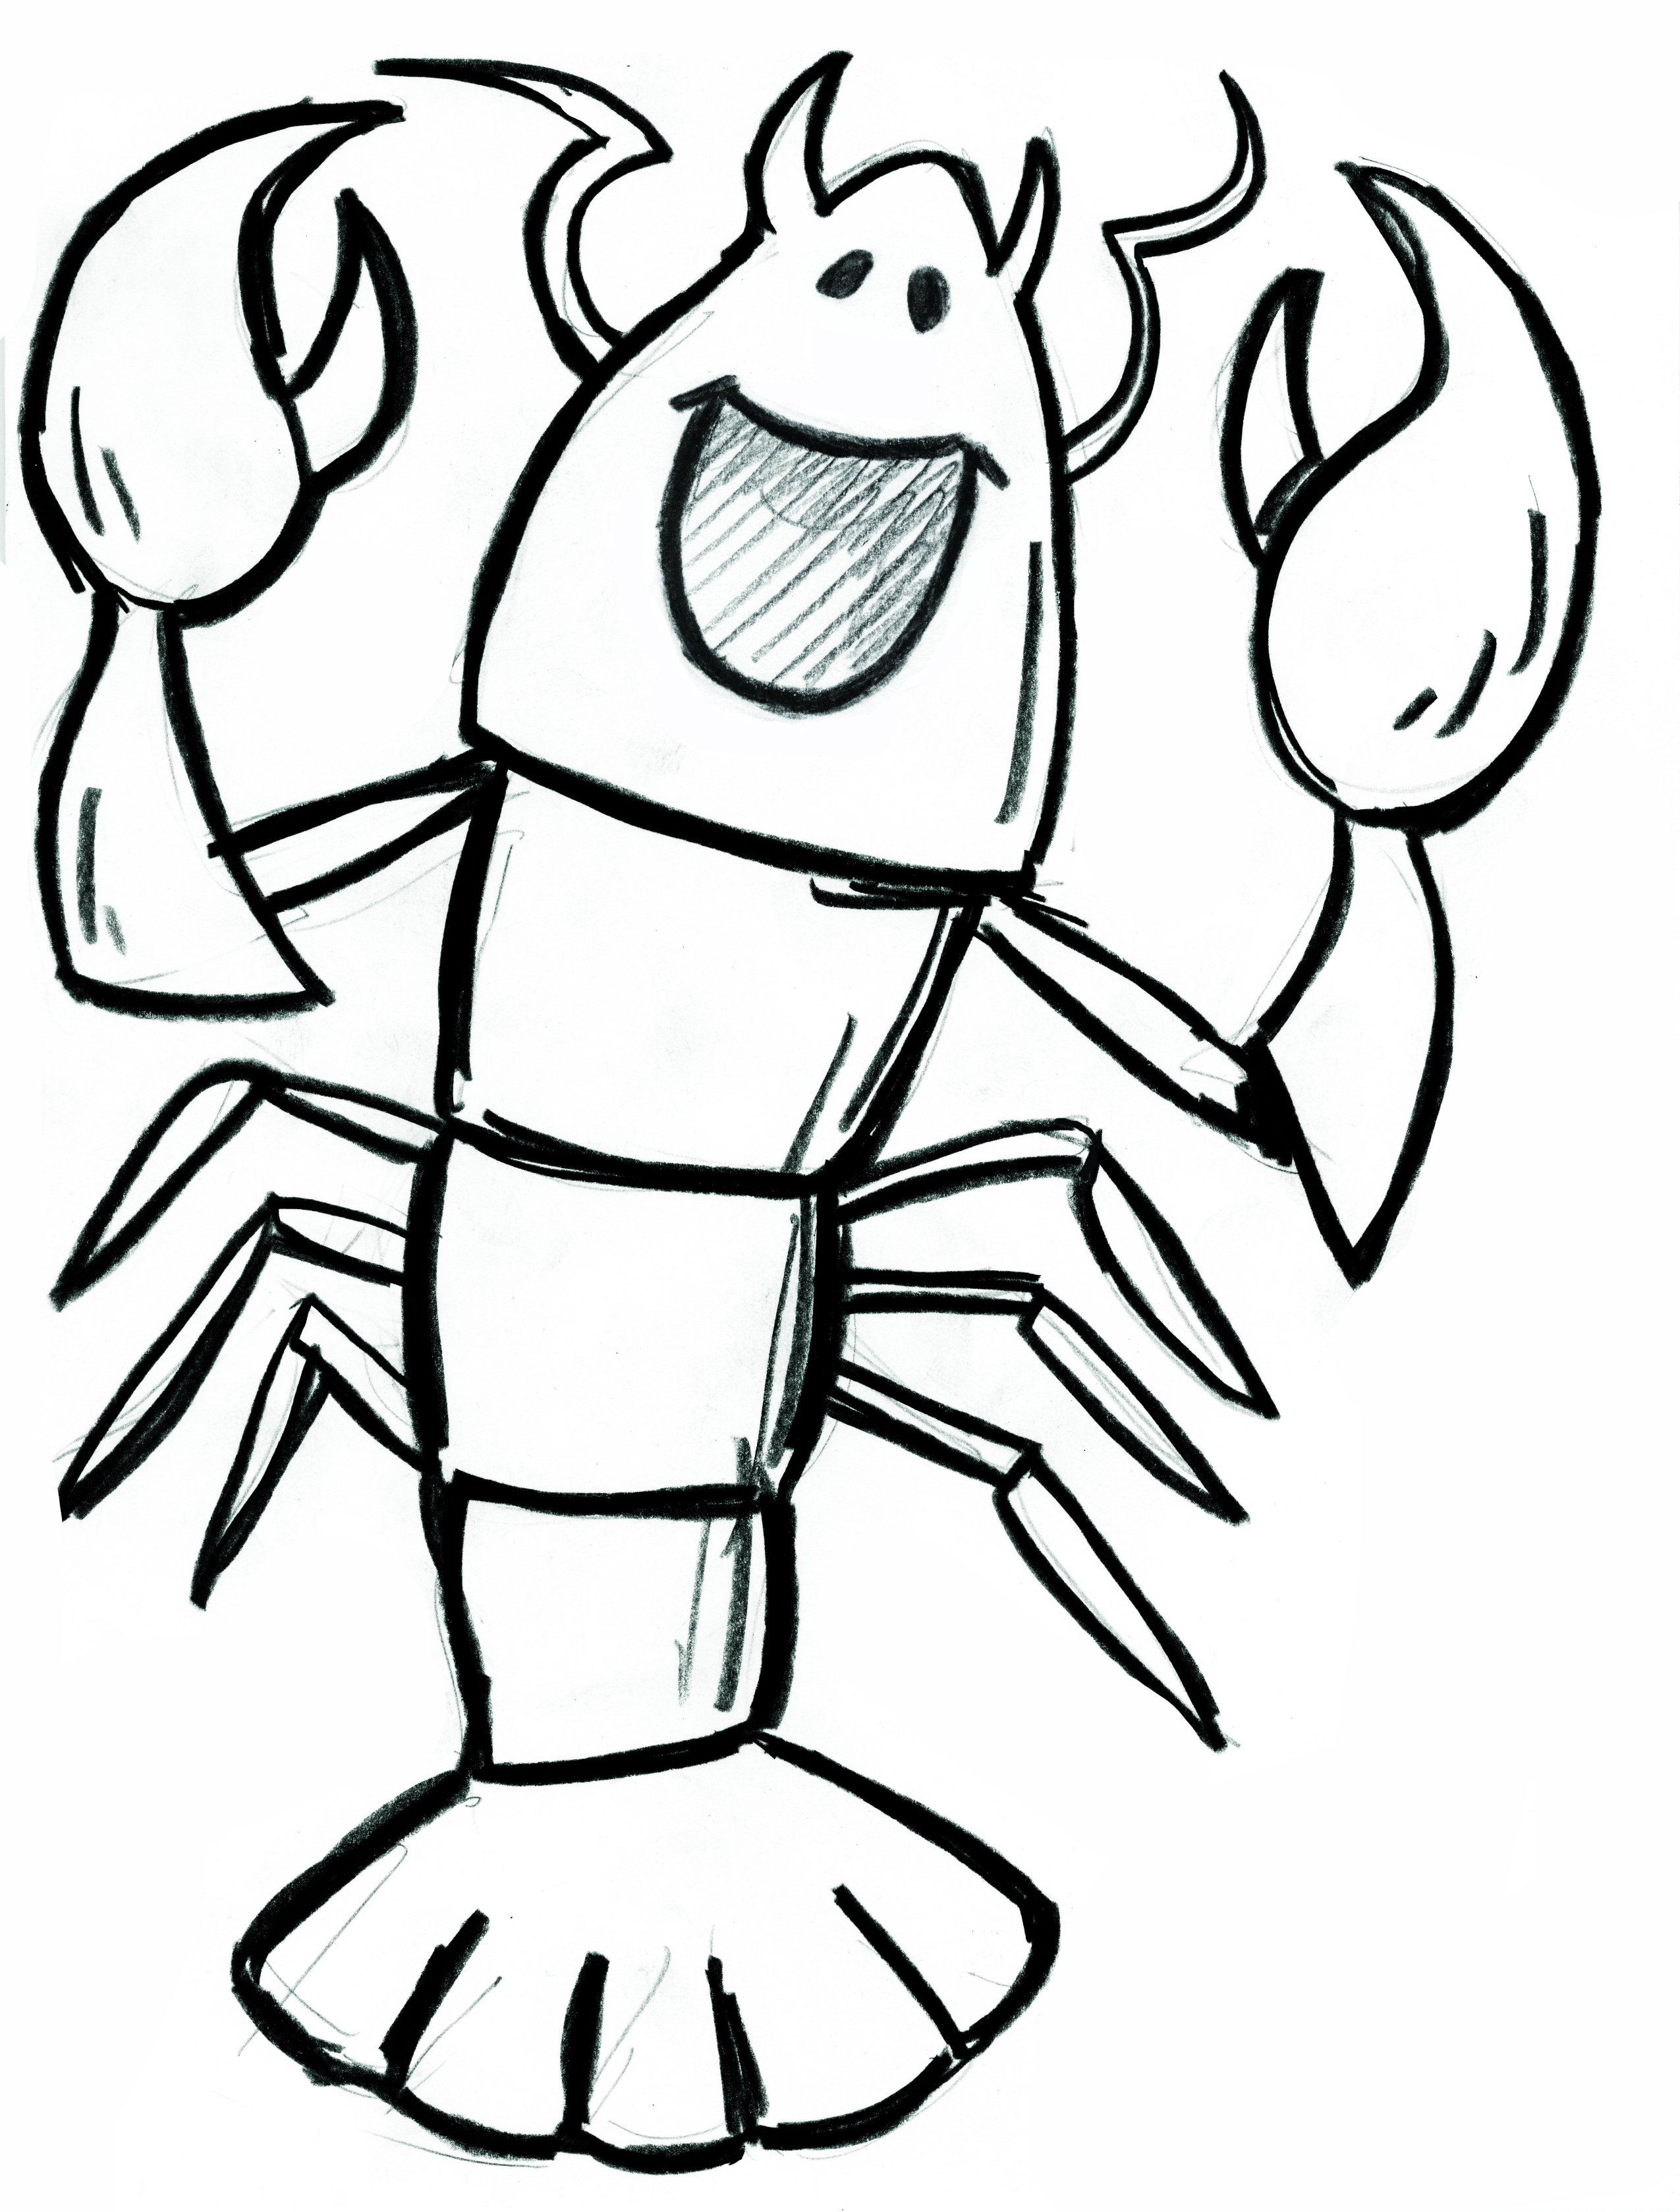 Free lobster s animated lobsters clipart - Clipartix